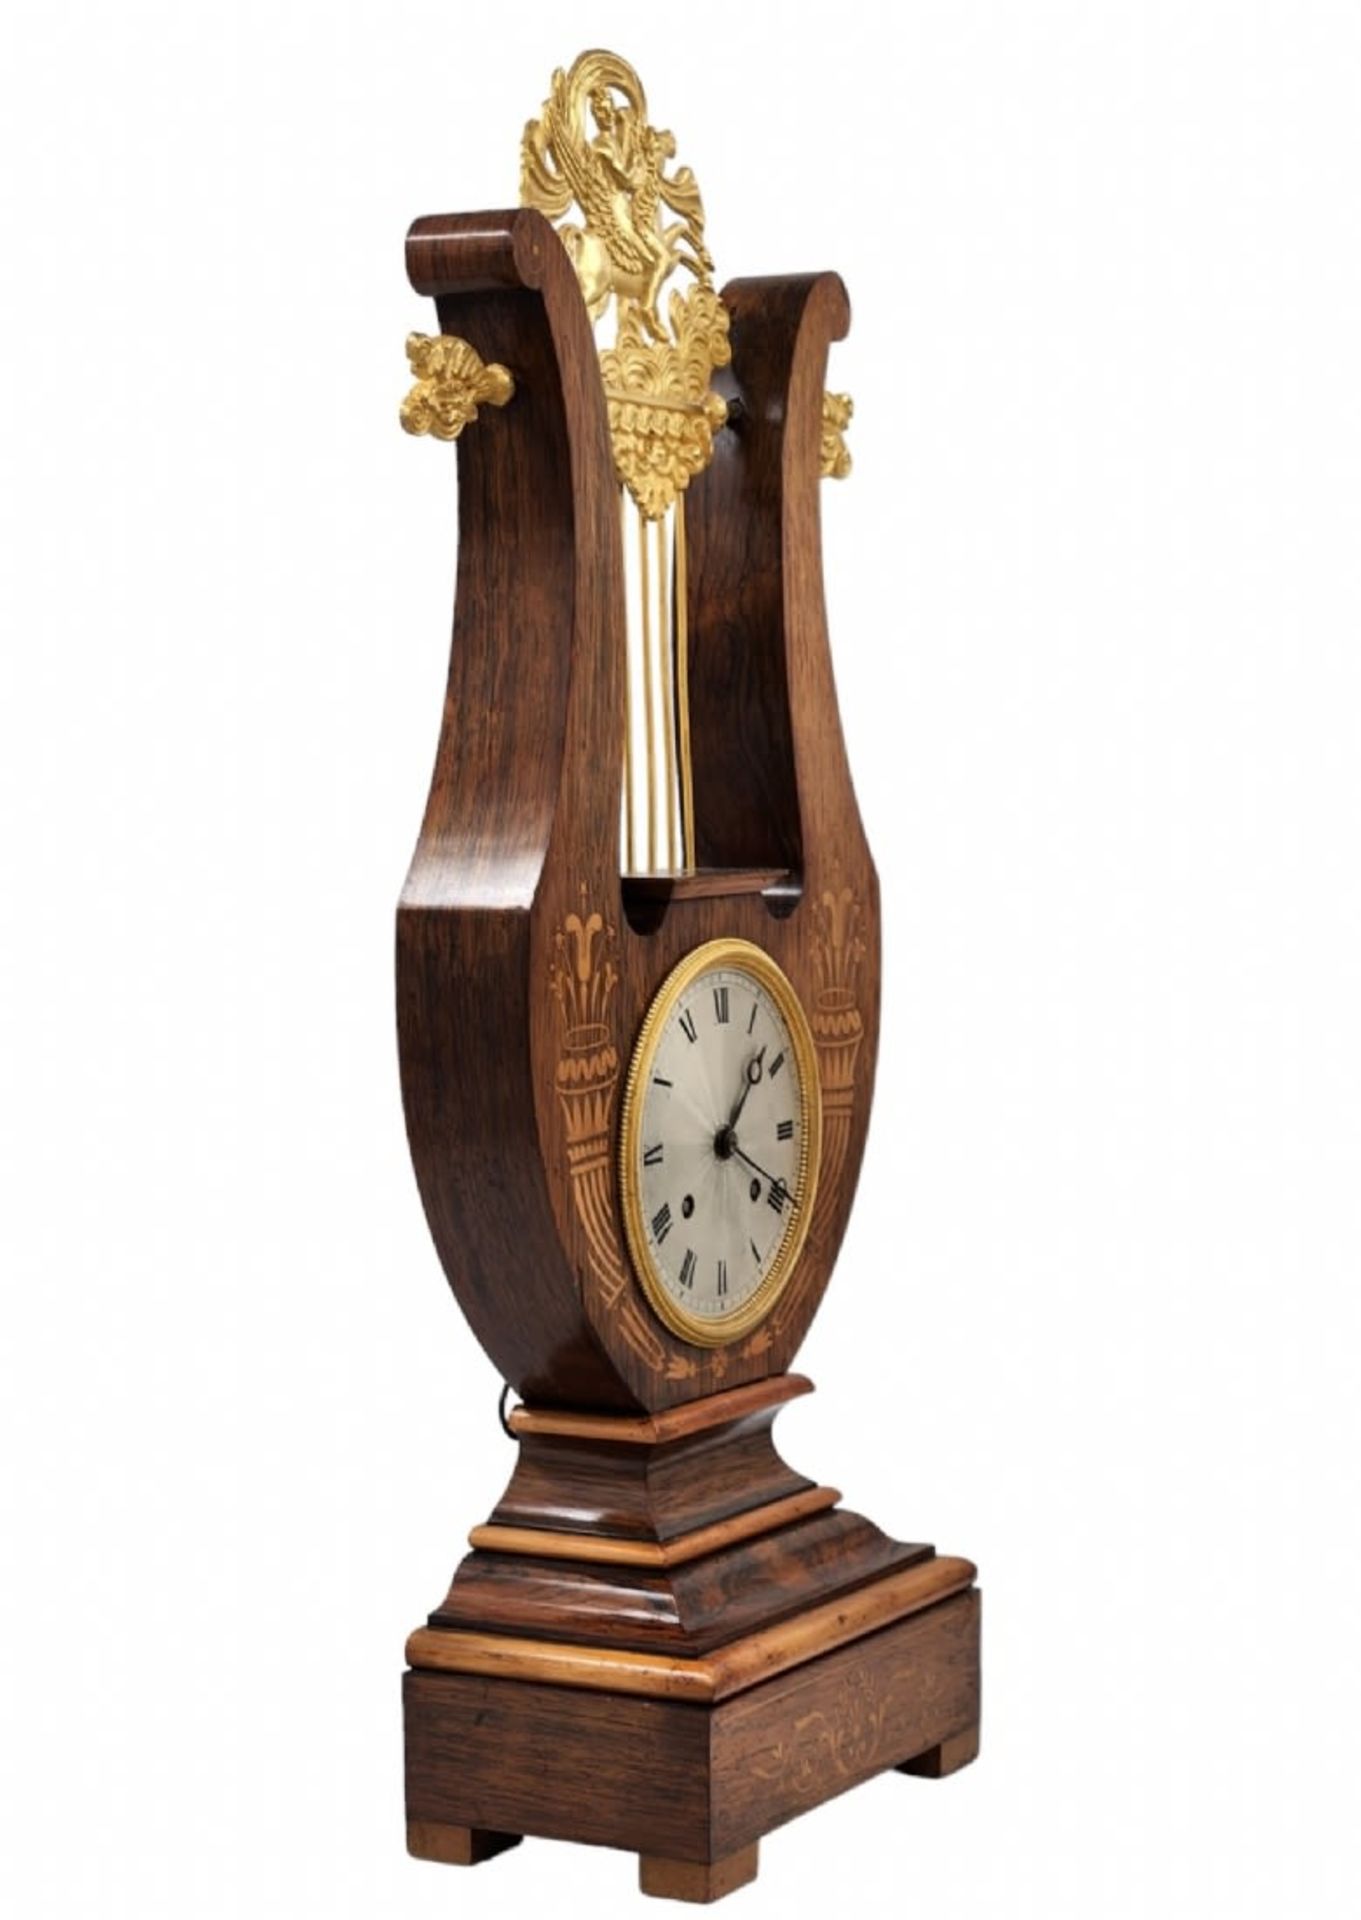 Antique mantle clock from the mid-19th century, designed in the shape of a lyre, made in 'Empire' - Bild 3 aus 8